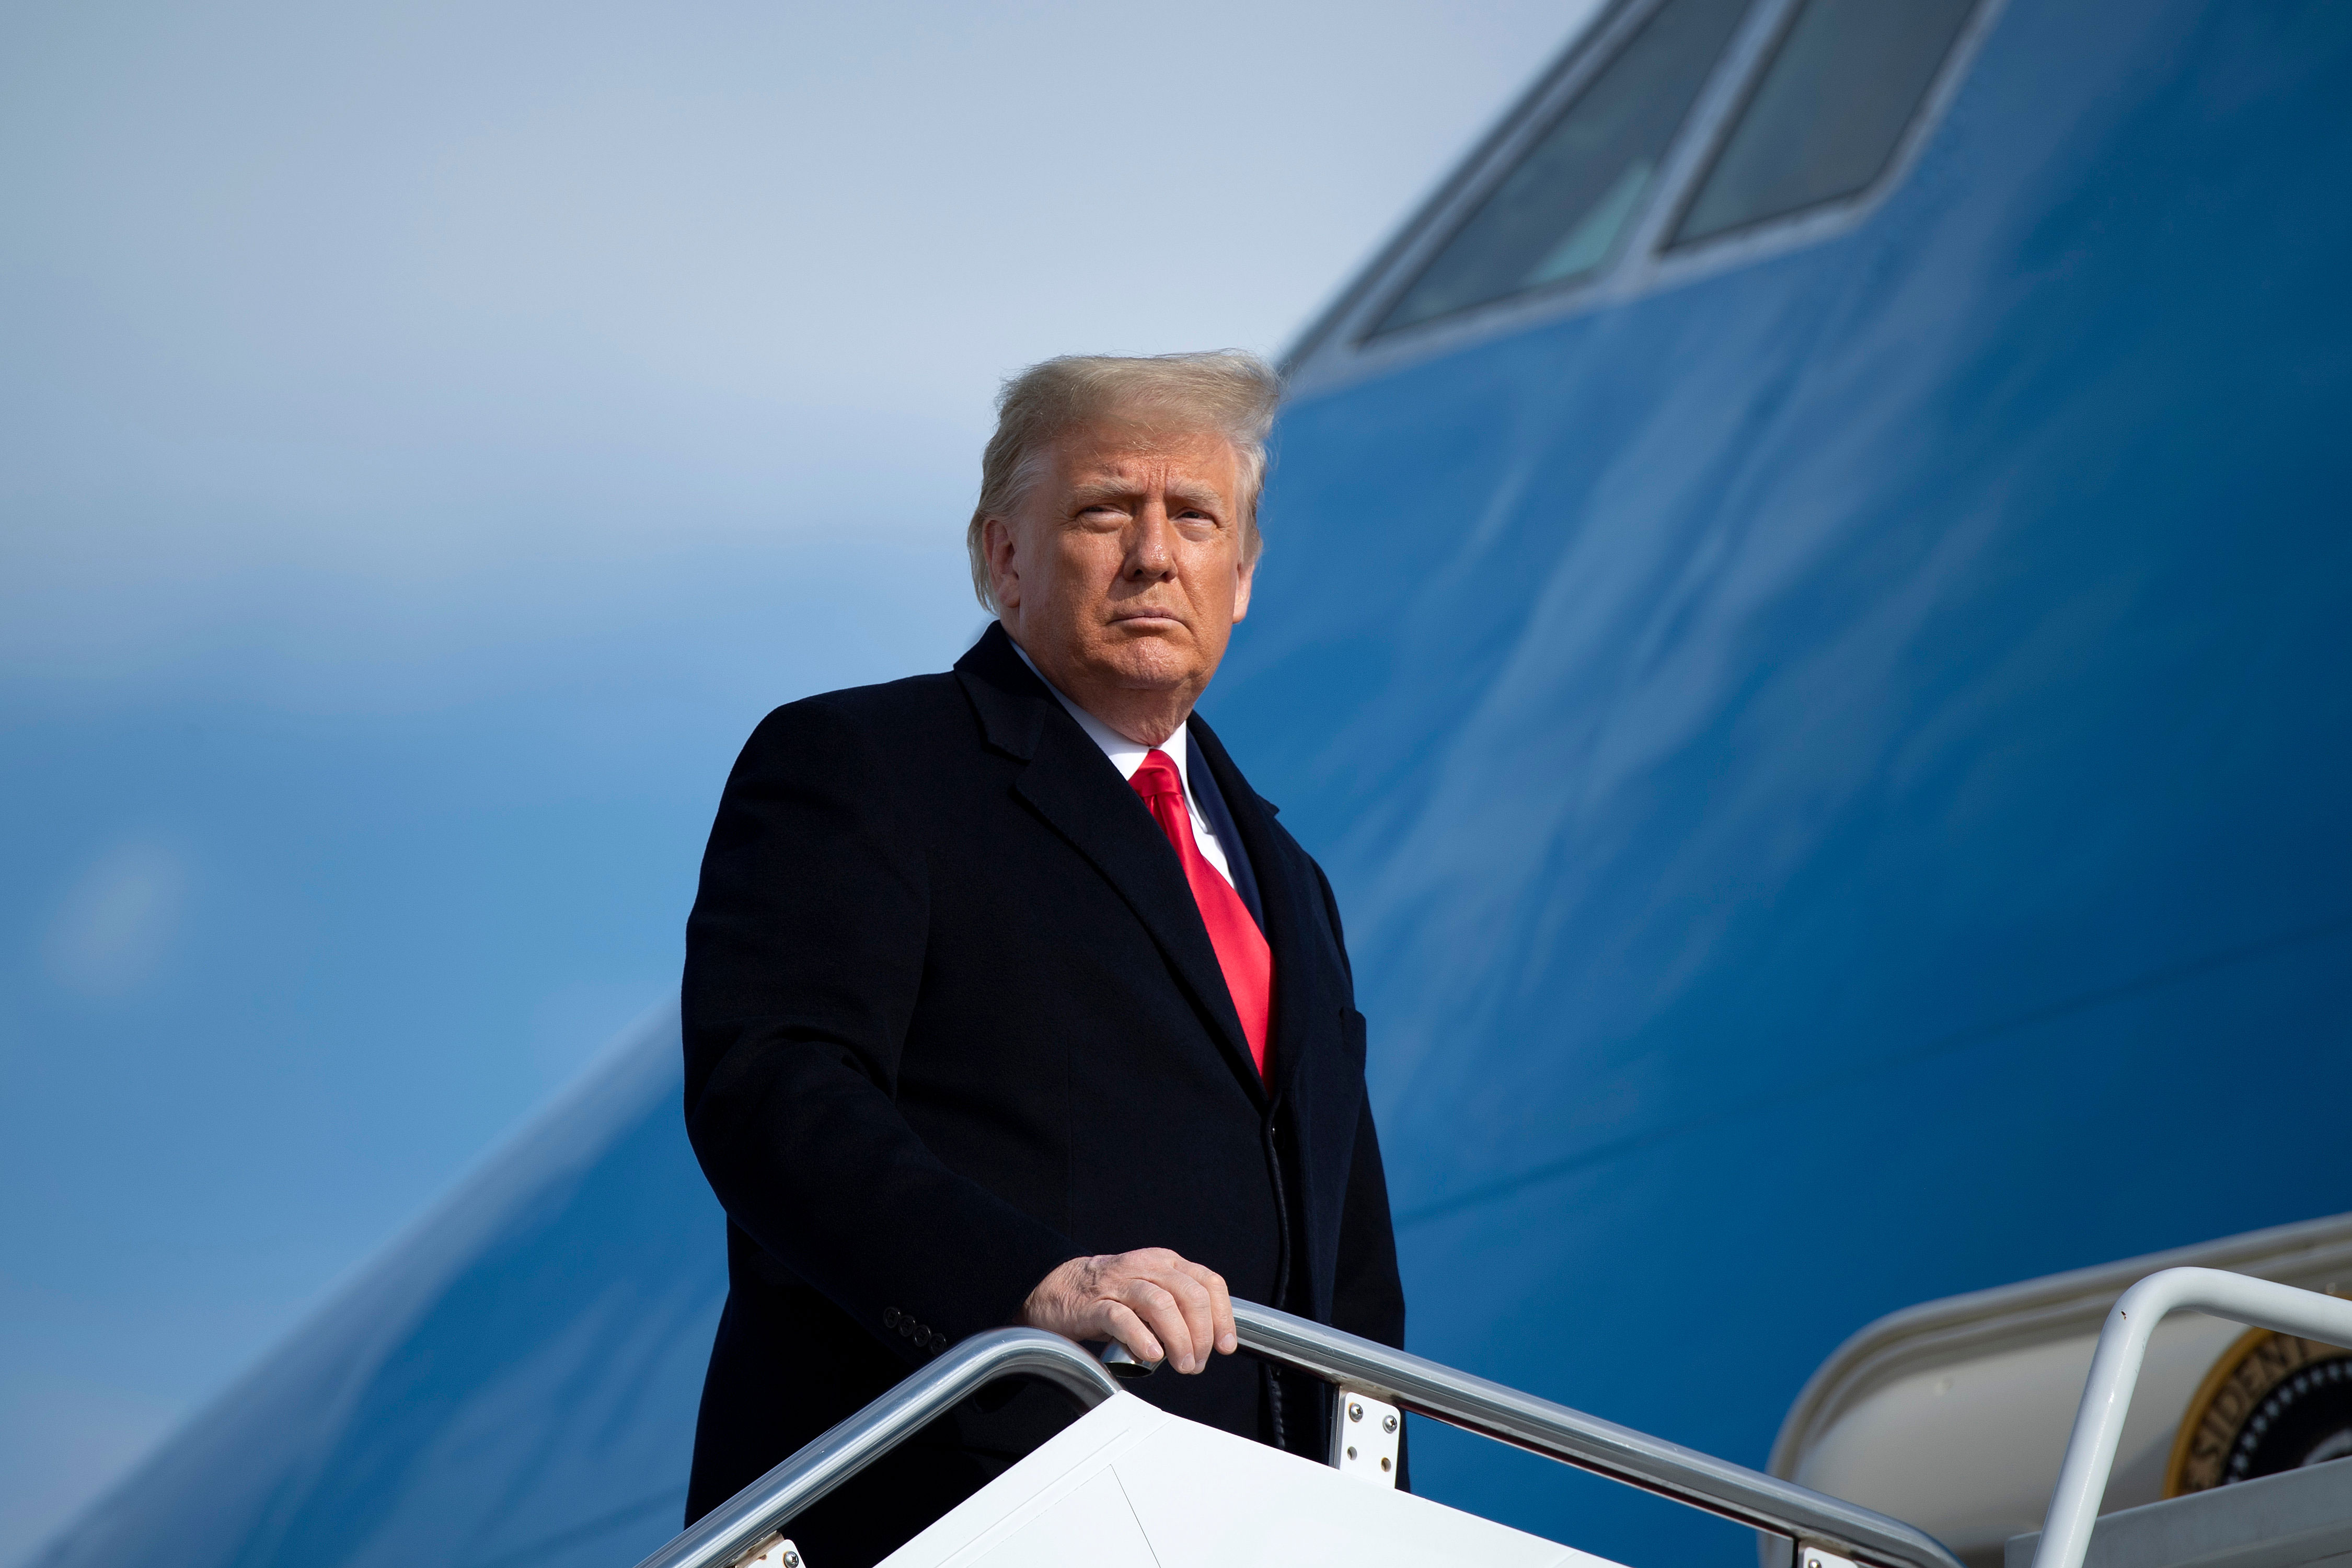 President Donald Trump boards Air Force One on December 12 at Joint Base Andrews in Maryland.